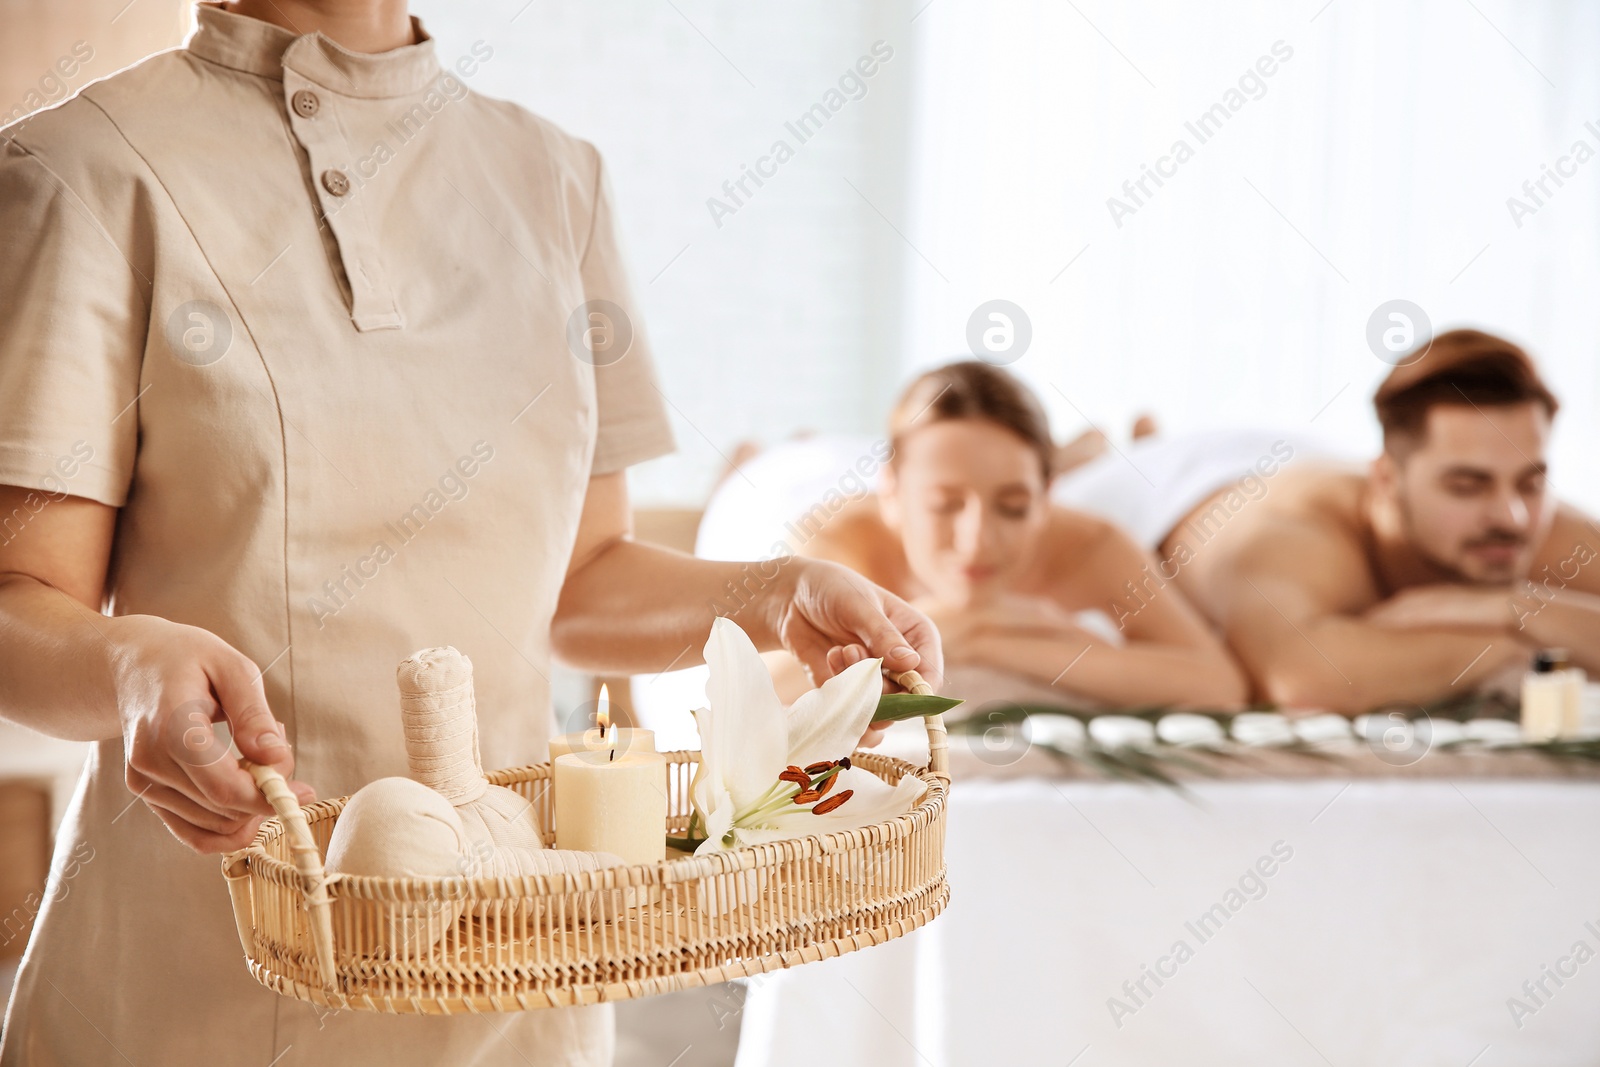 Photo of Massage therapist with spa essentials and young couple in wellness center